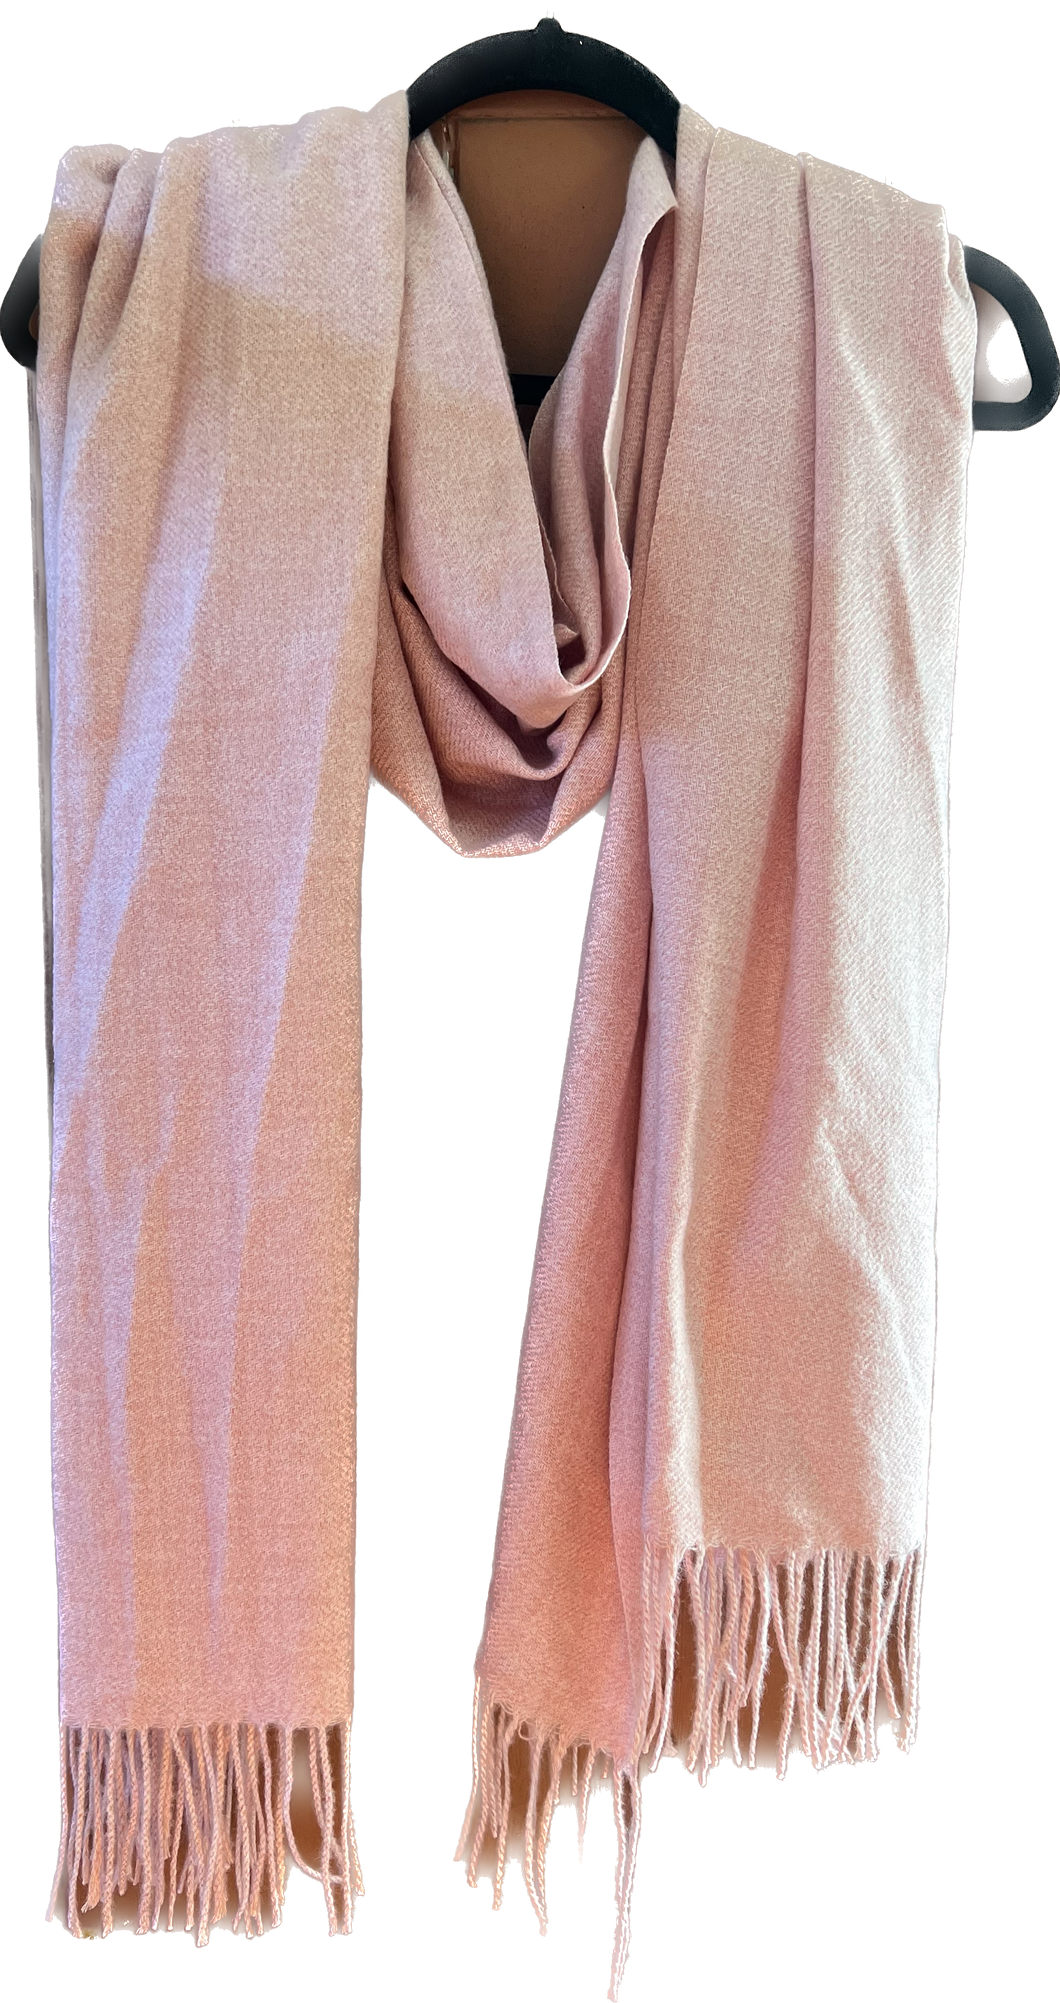 Warm, Cosy, Winter Scarf in Pink